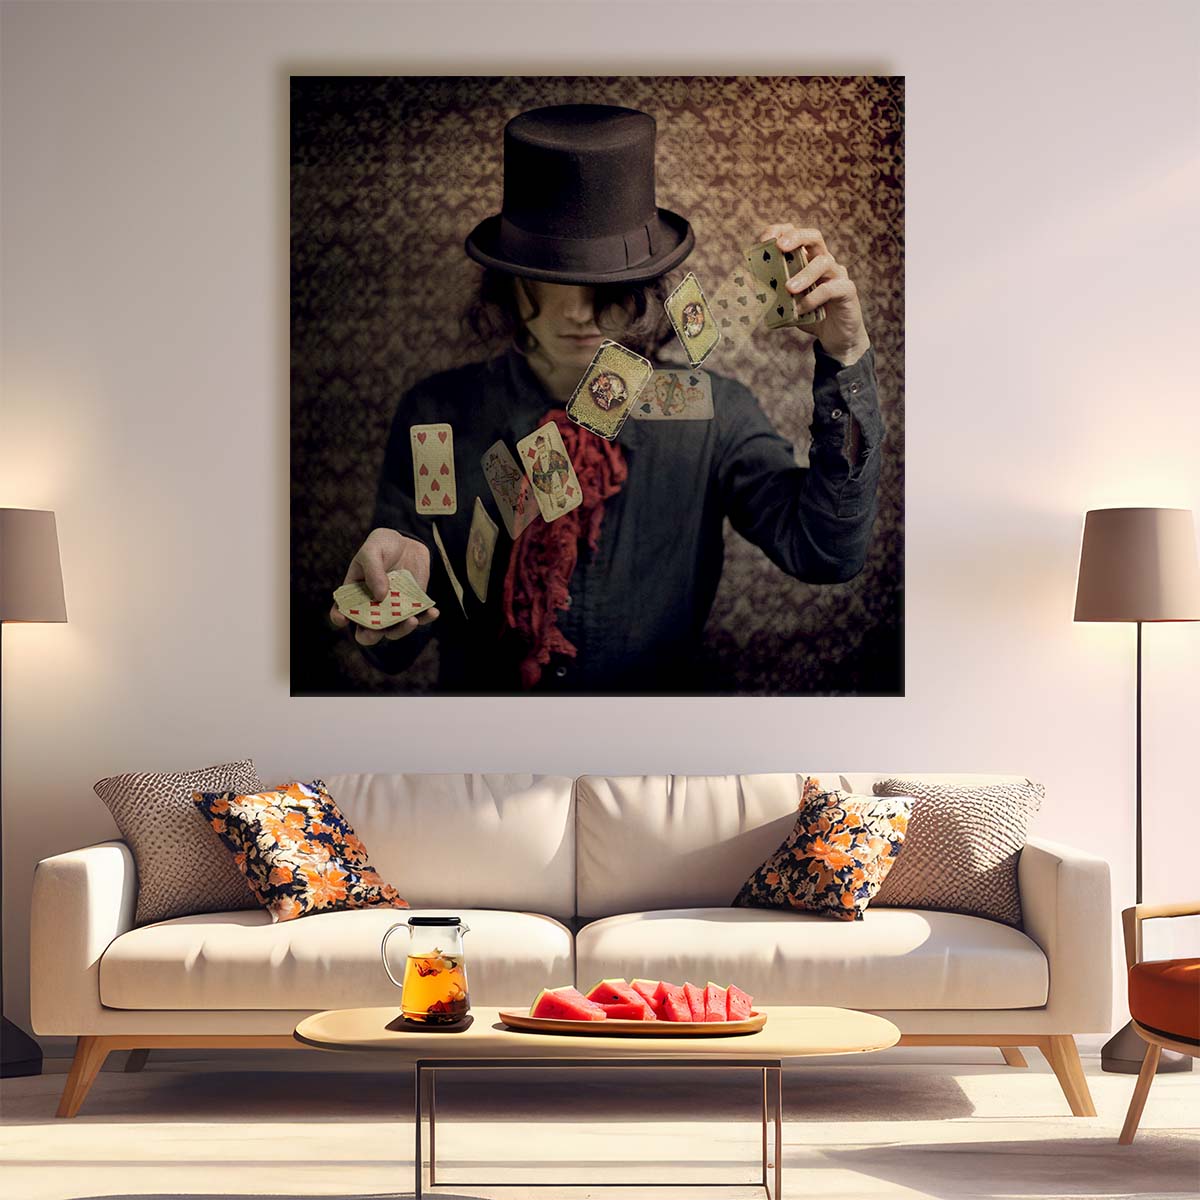 Classic Magician Portrait Vintage Card Tricks & Fortune Wall Art by Luxuriance Designs. Made in USA.